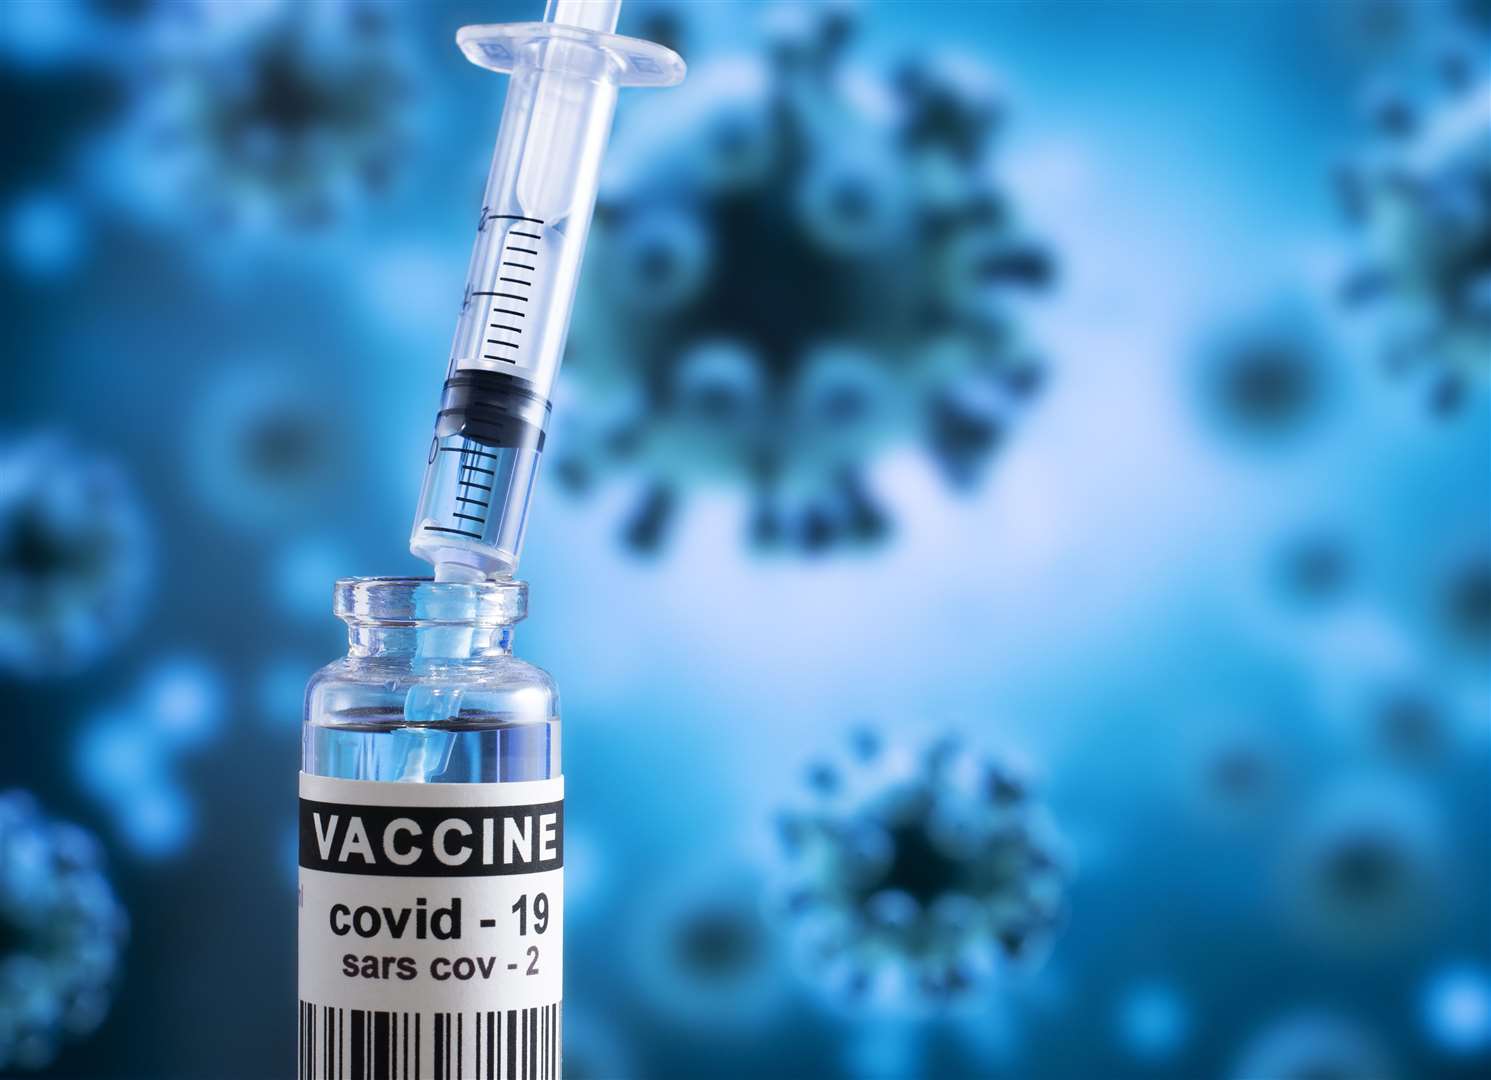 The Covid-19 vaccine and syringe for injection. Stock image